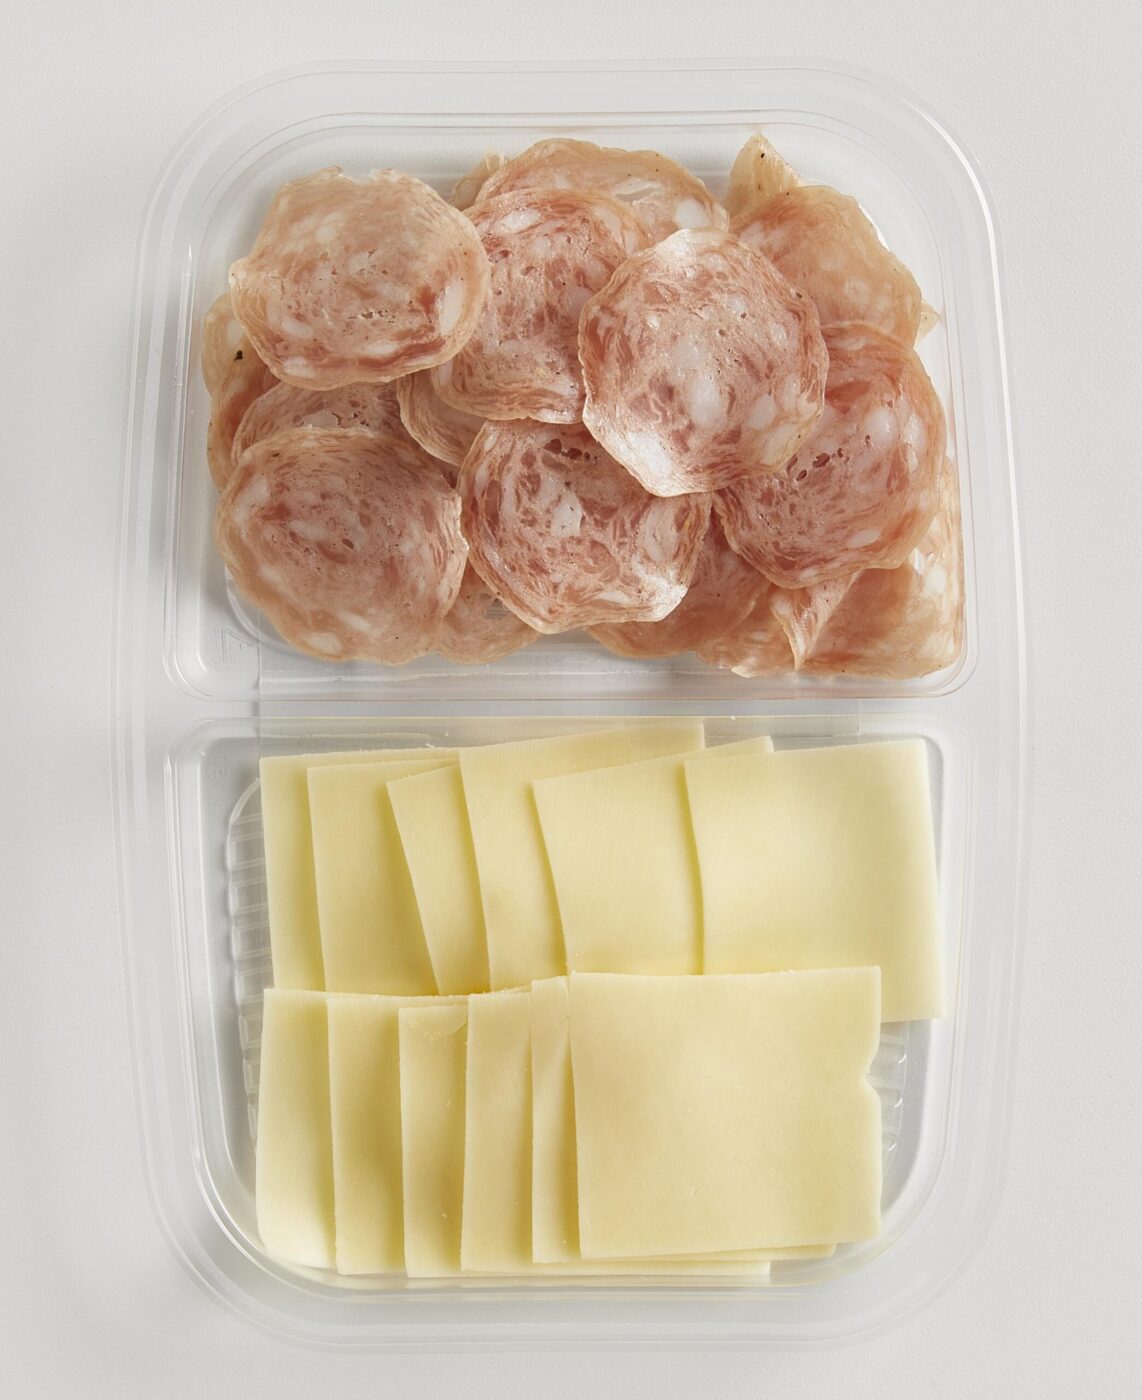 Meat and Cheese snack side by side